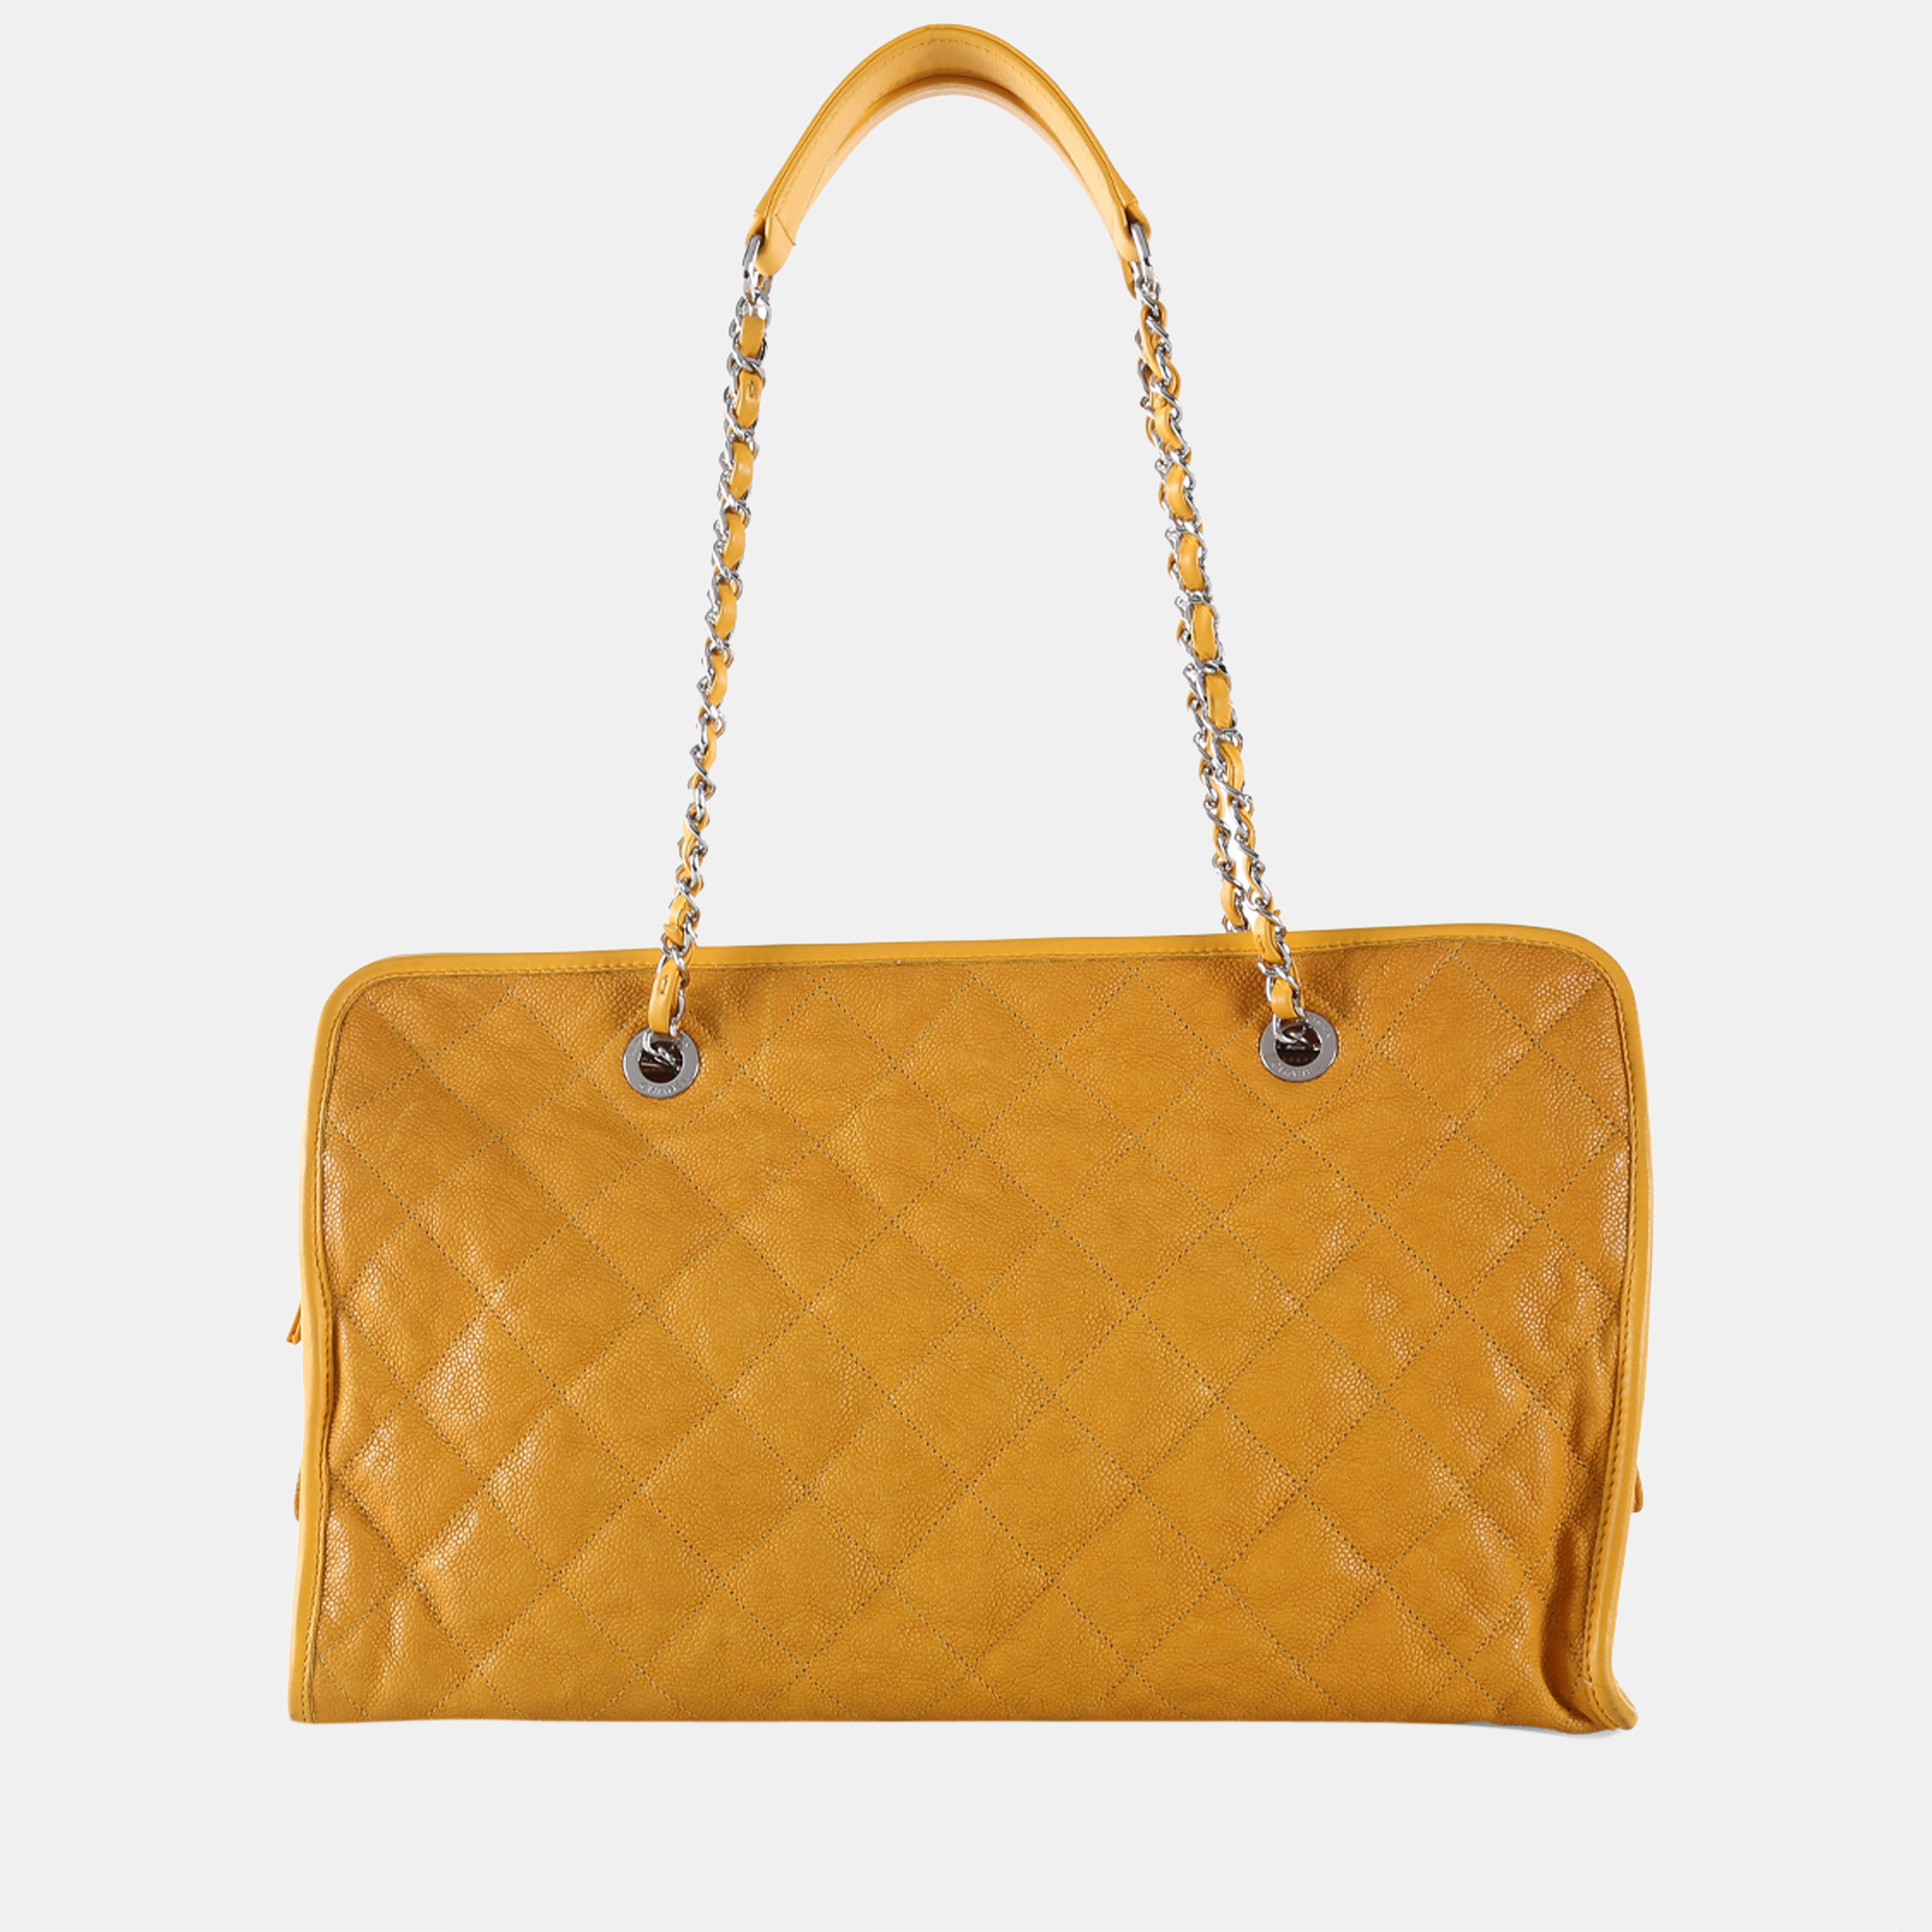 Chanel Yellow Caviar Leather French Riviera Large Tote Bag